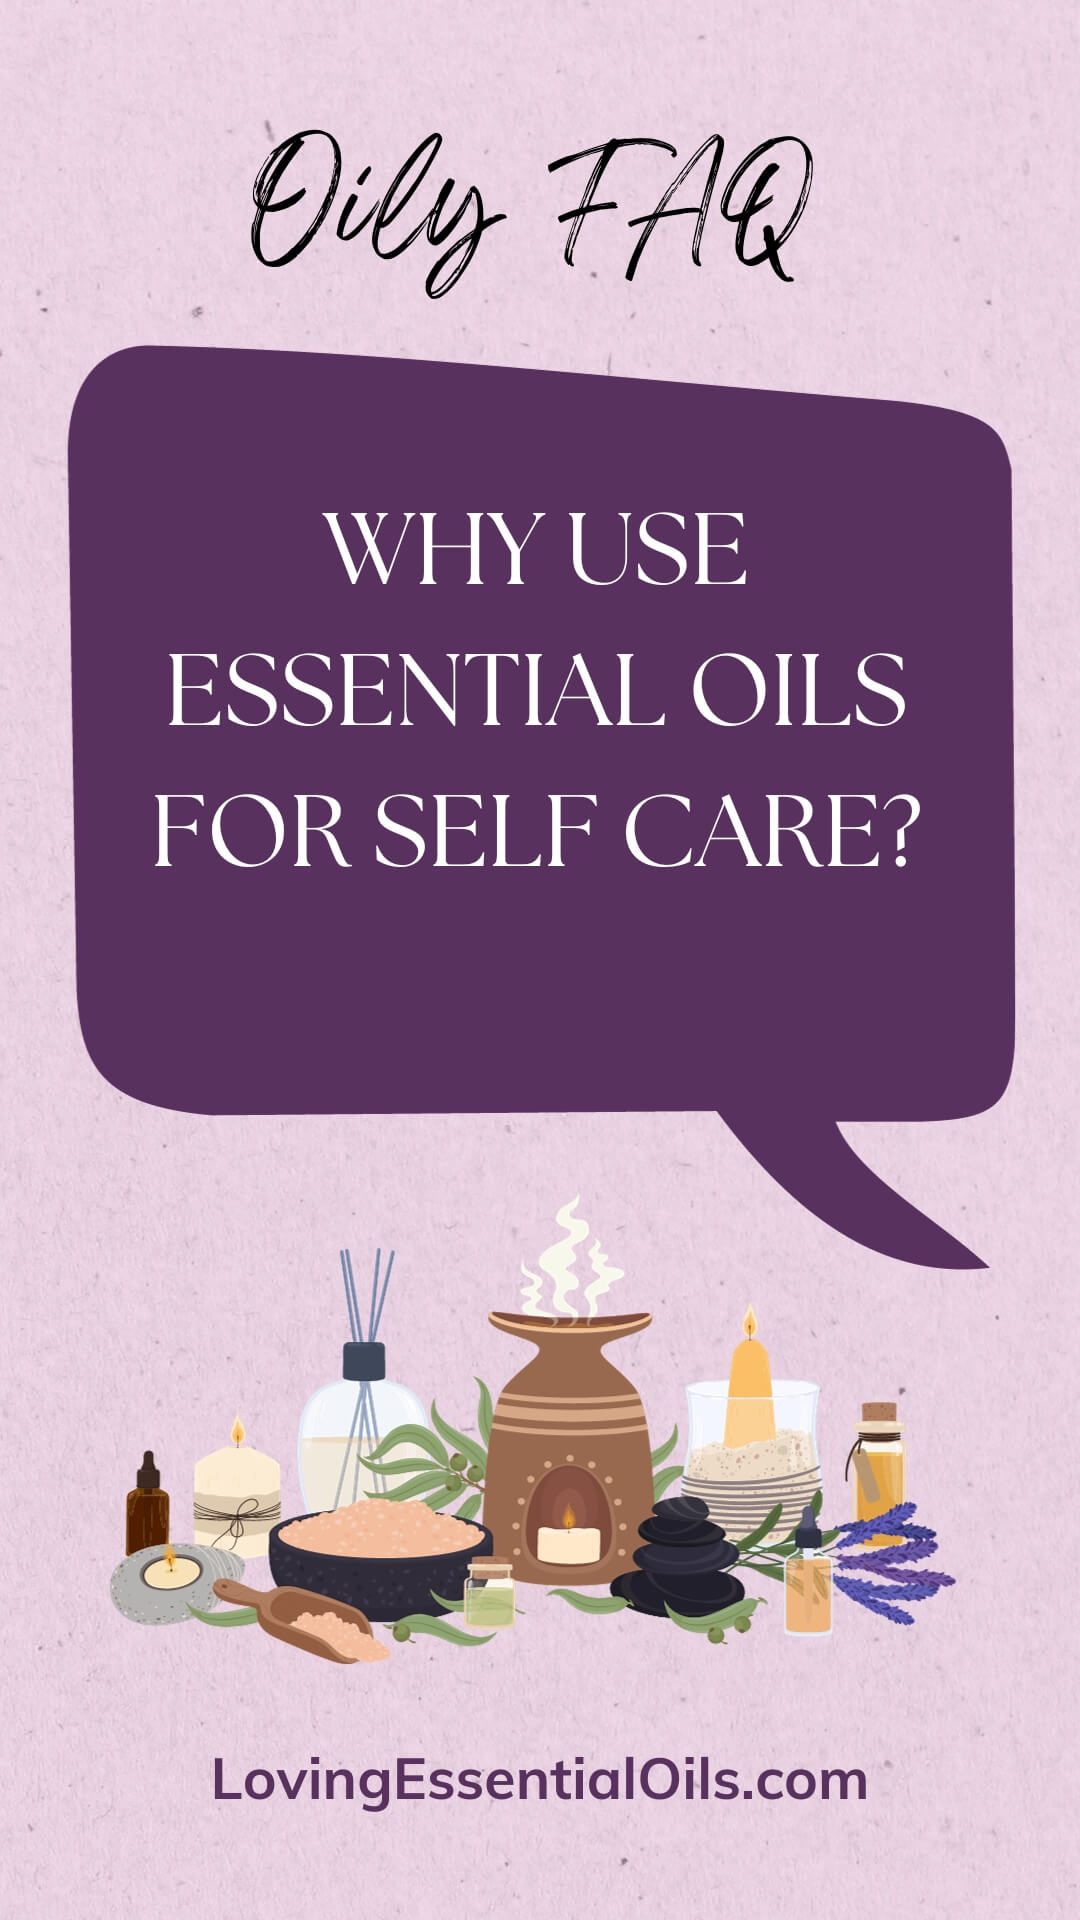 Why Use Essential Oils for Self Care? by Loving Essential Oils